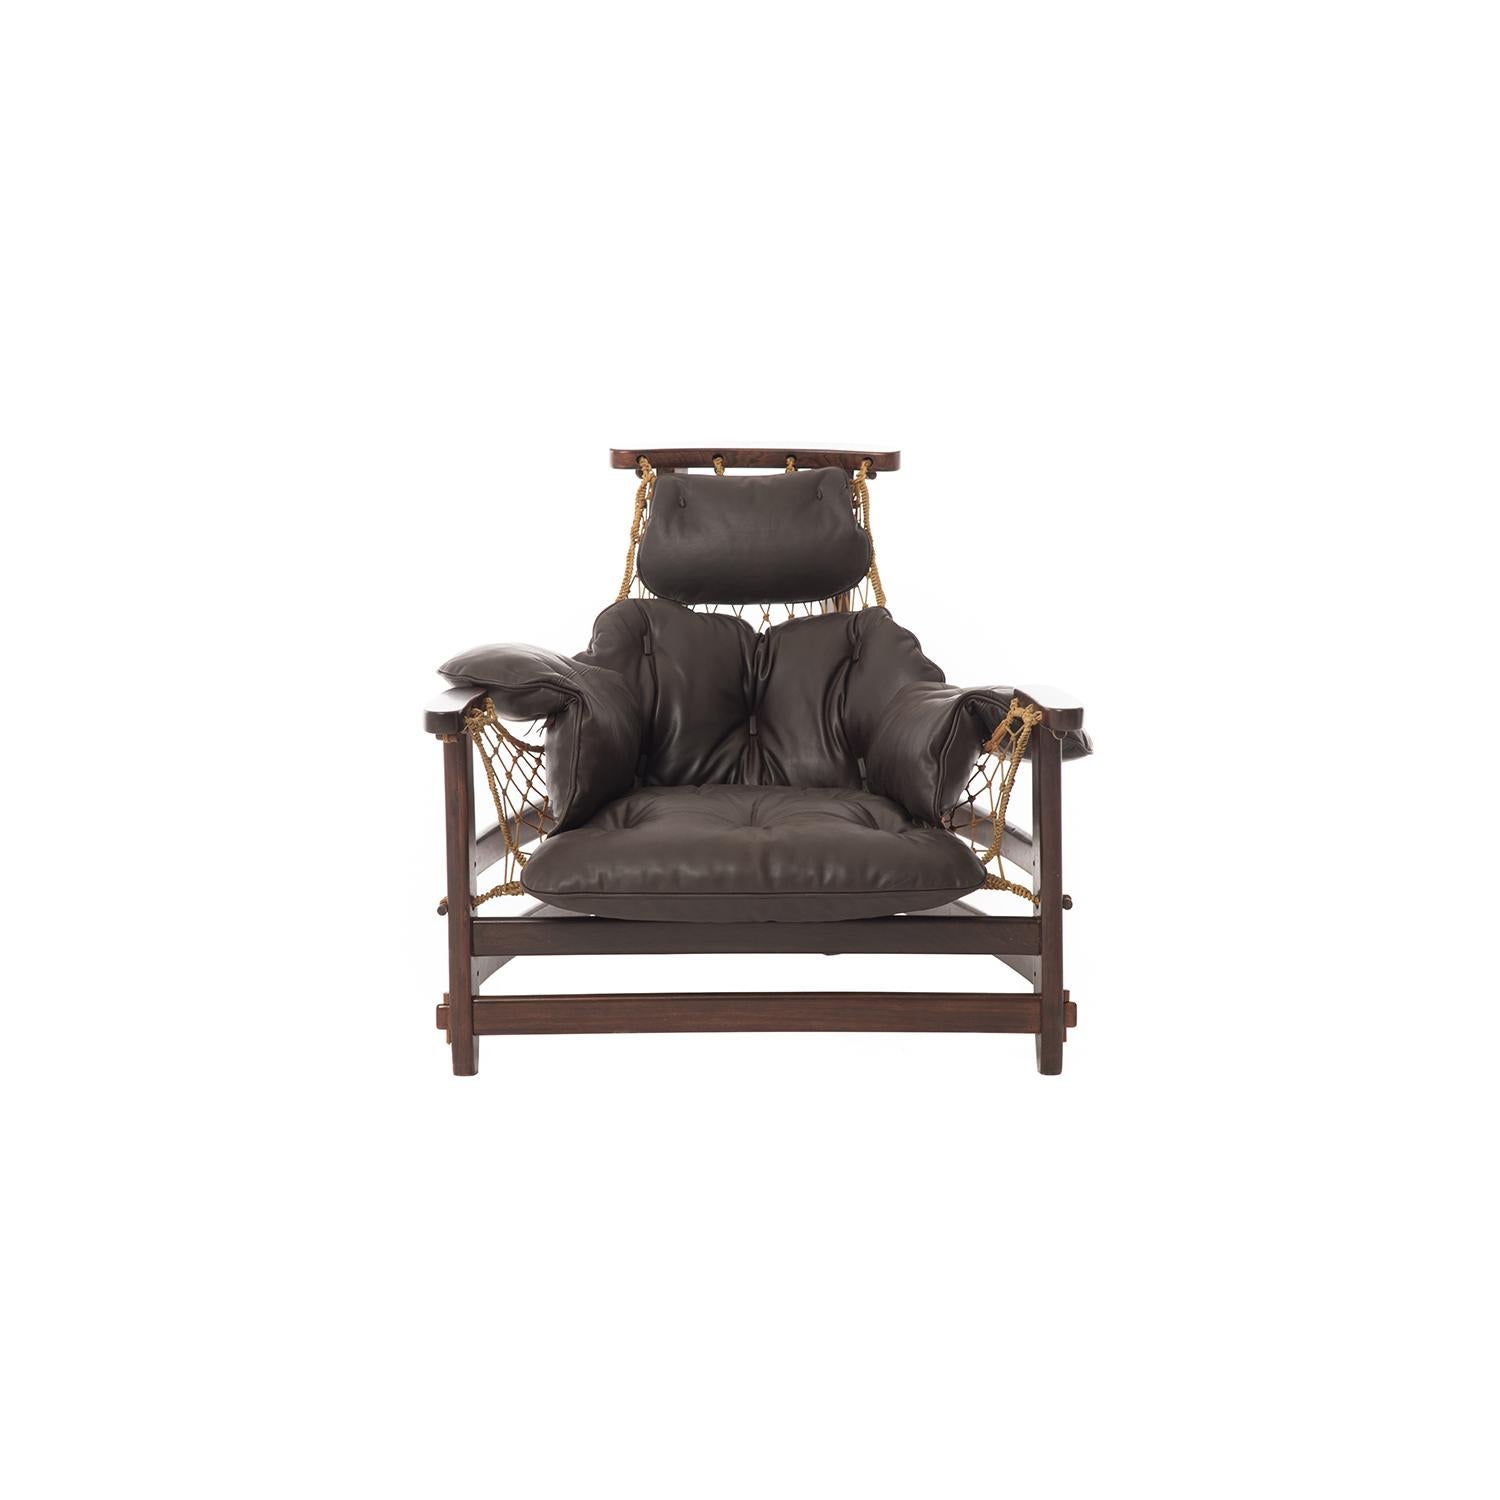 This show-stopping lounge chair and ottoman by Brazilian designer Jean Gillon starts with an angular rosewood frame adorned with a hand knotted, natural fiber sling. Leather cushions are new in a thick and supple deep brown, featuring rectangular